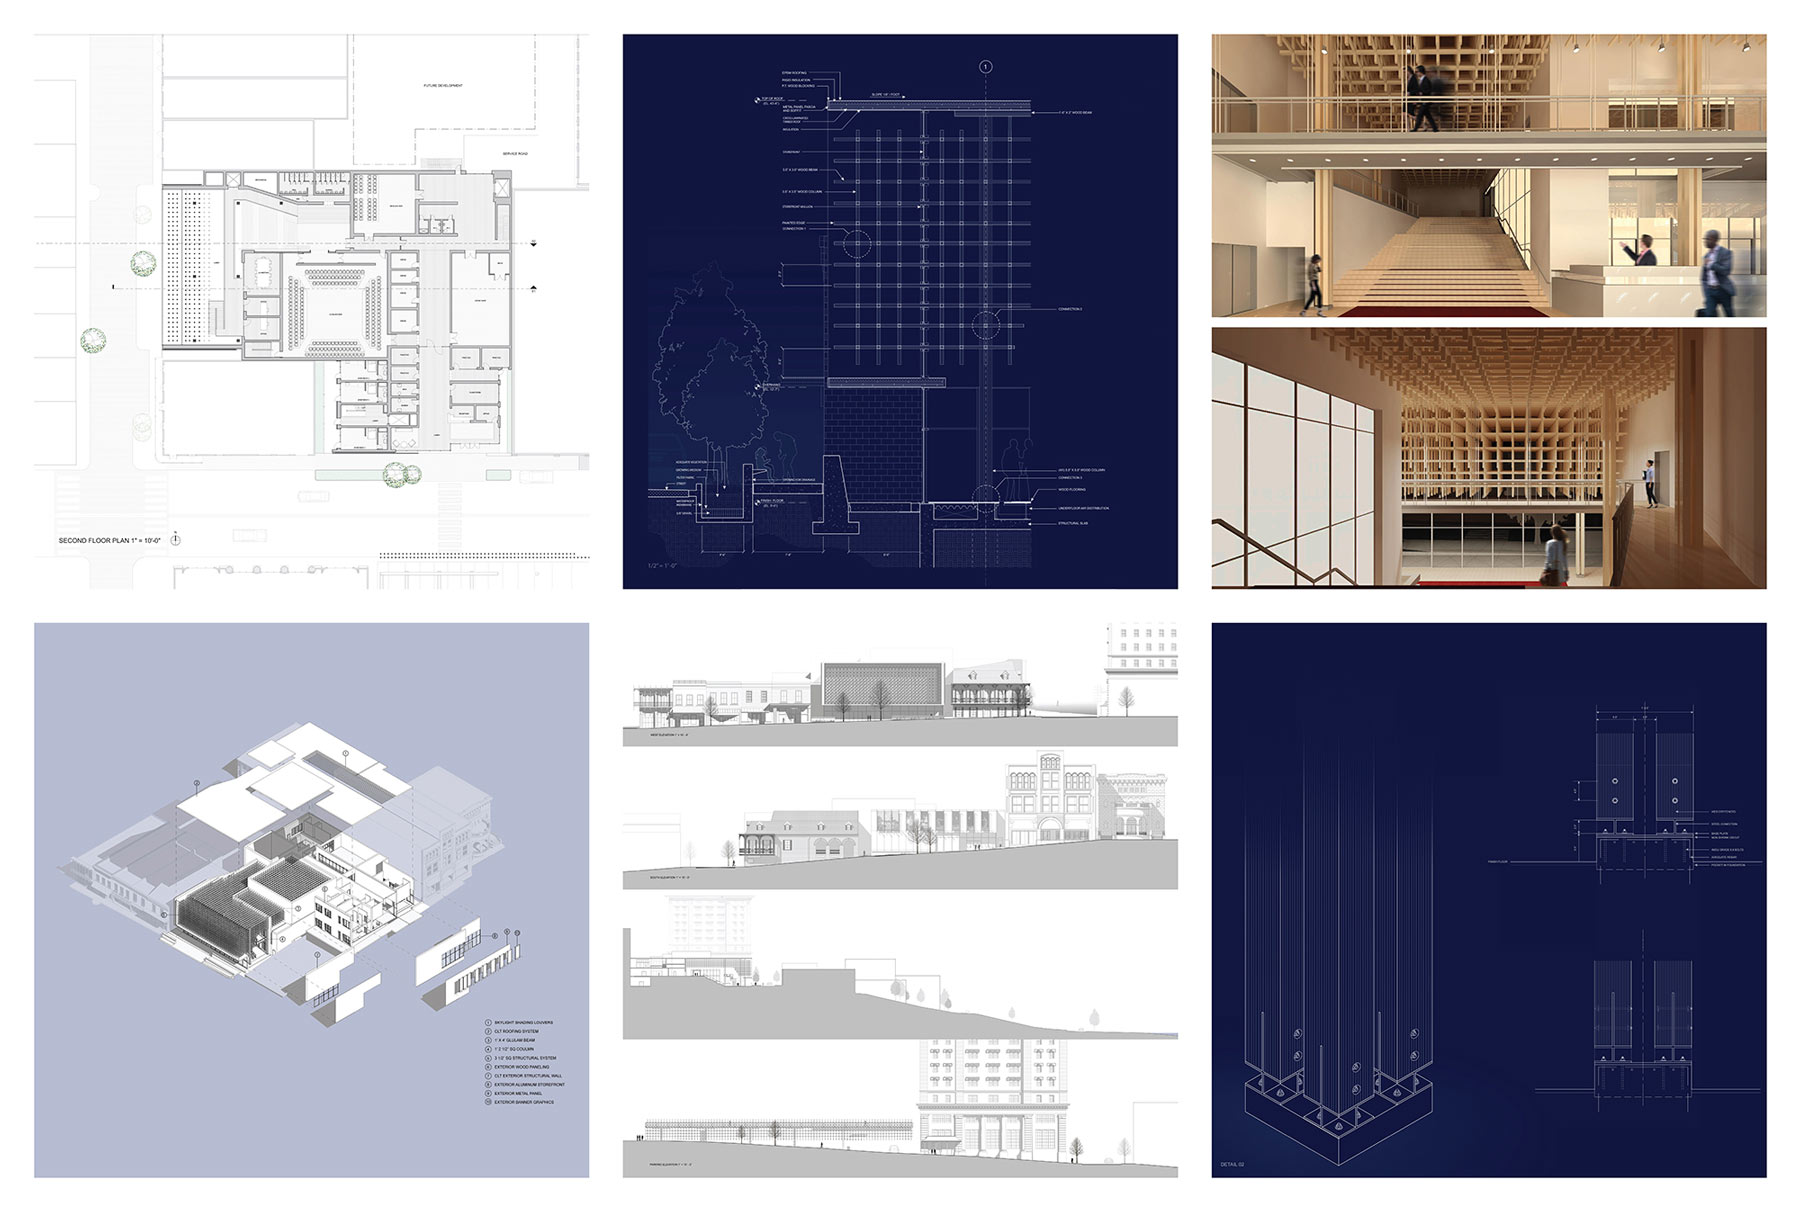 A collage of six different blueprints. The top left and bottom middle photos are gray and white blueprints of the buildings design. The bottom left photo is a gray and white blueprint with a lavender background. And the top middle and bottom right phots are white blueprints with a navy blue backdrop. The top left image is a real photo of a wooden interior. There are thin strips of wood running across the ceiling, and people walking around the room.